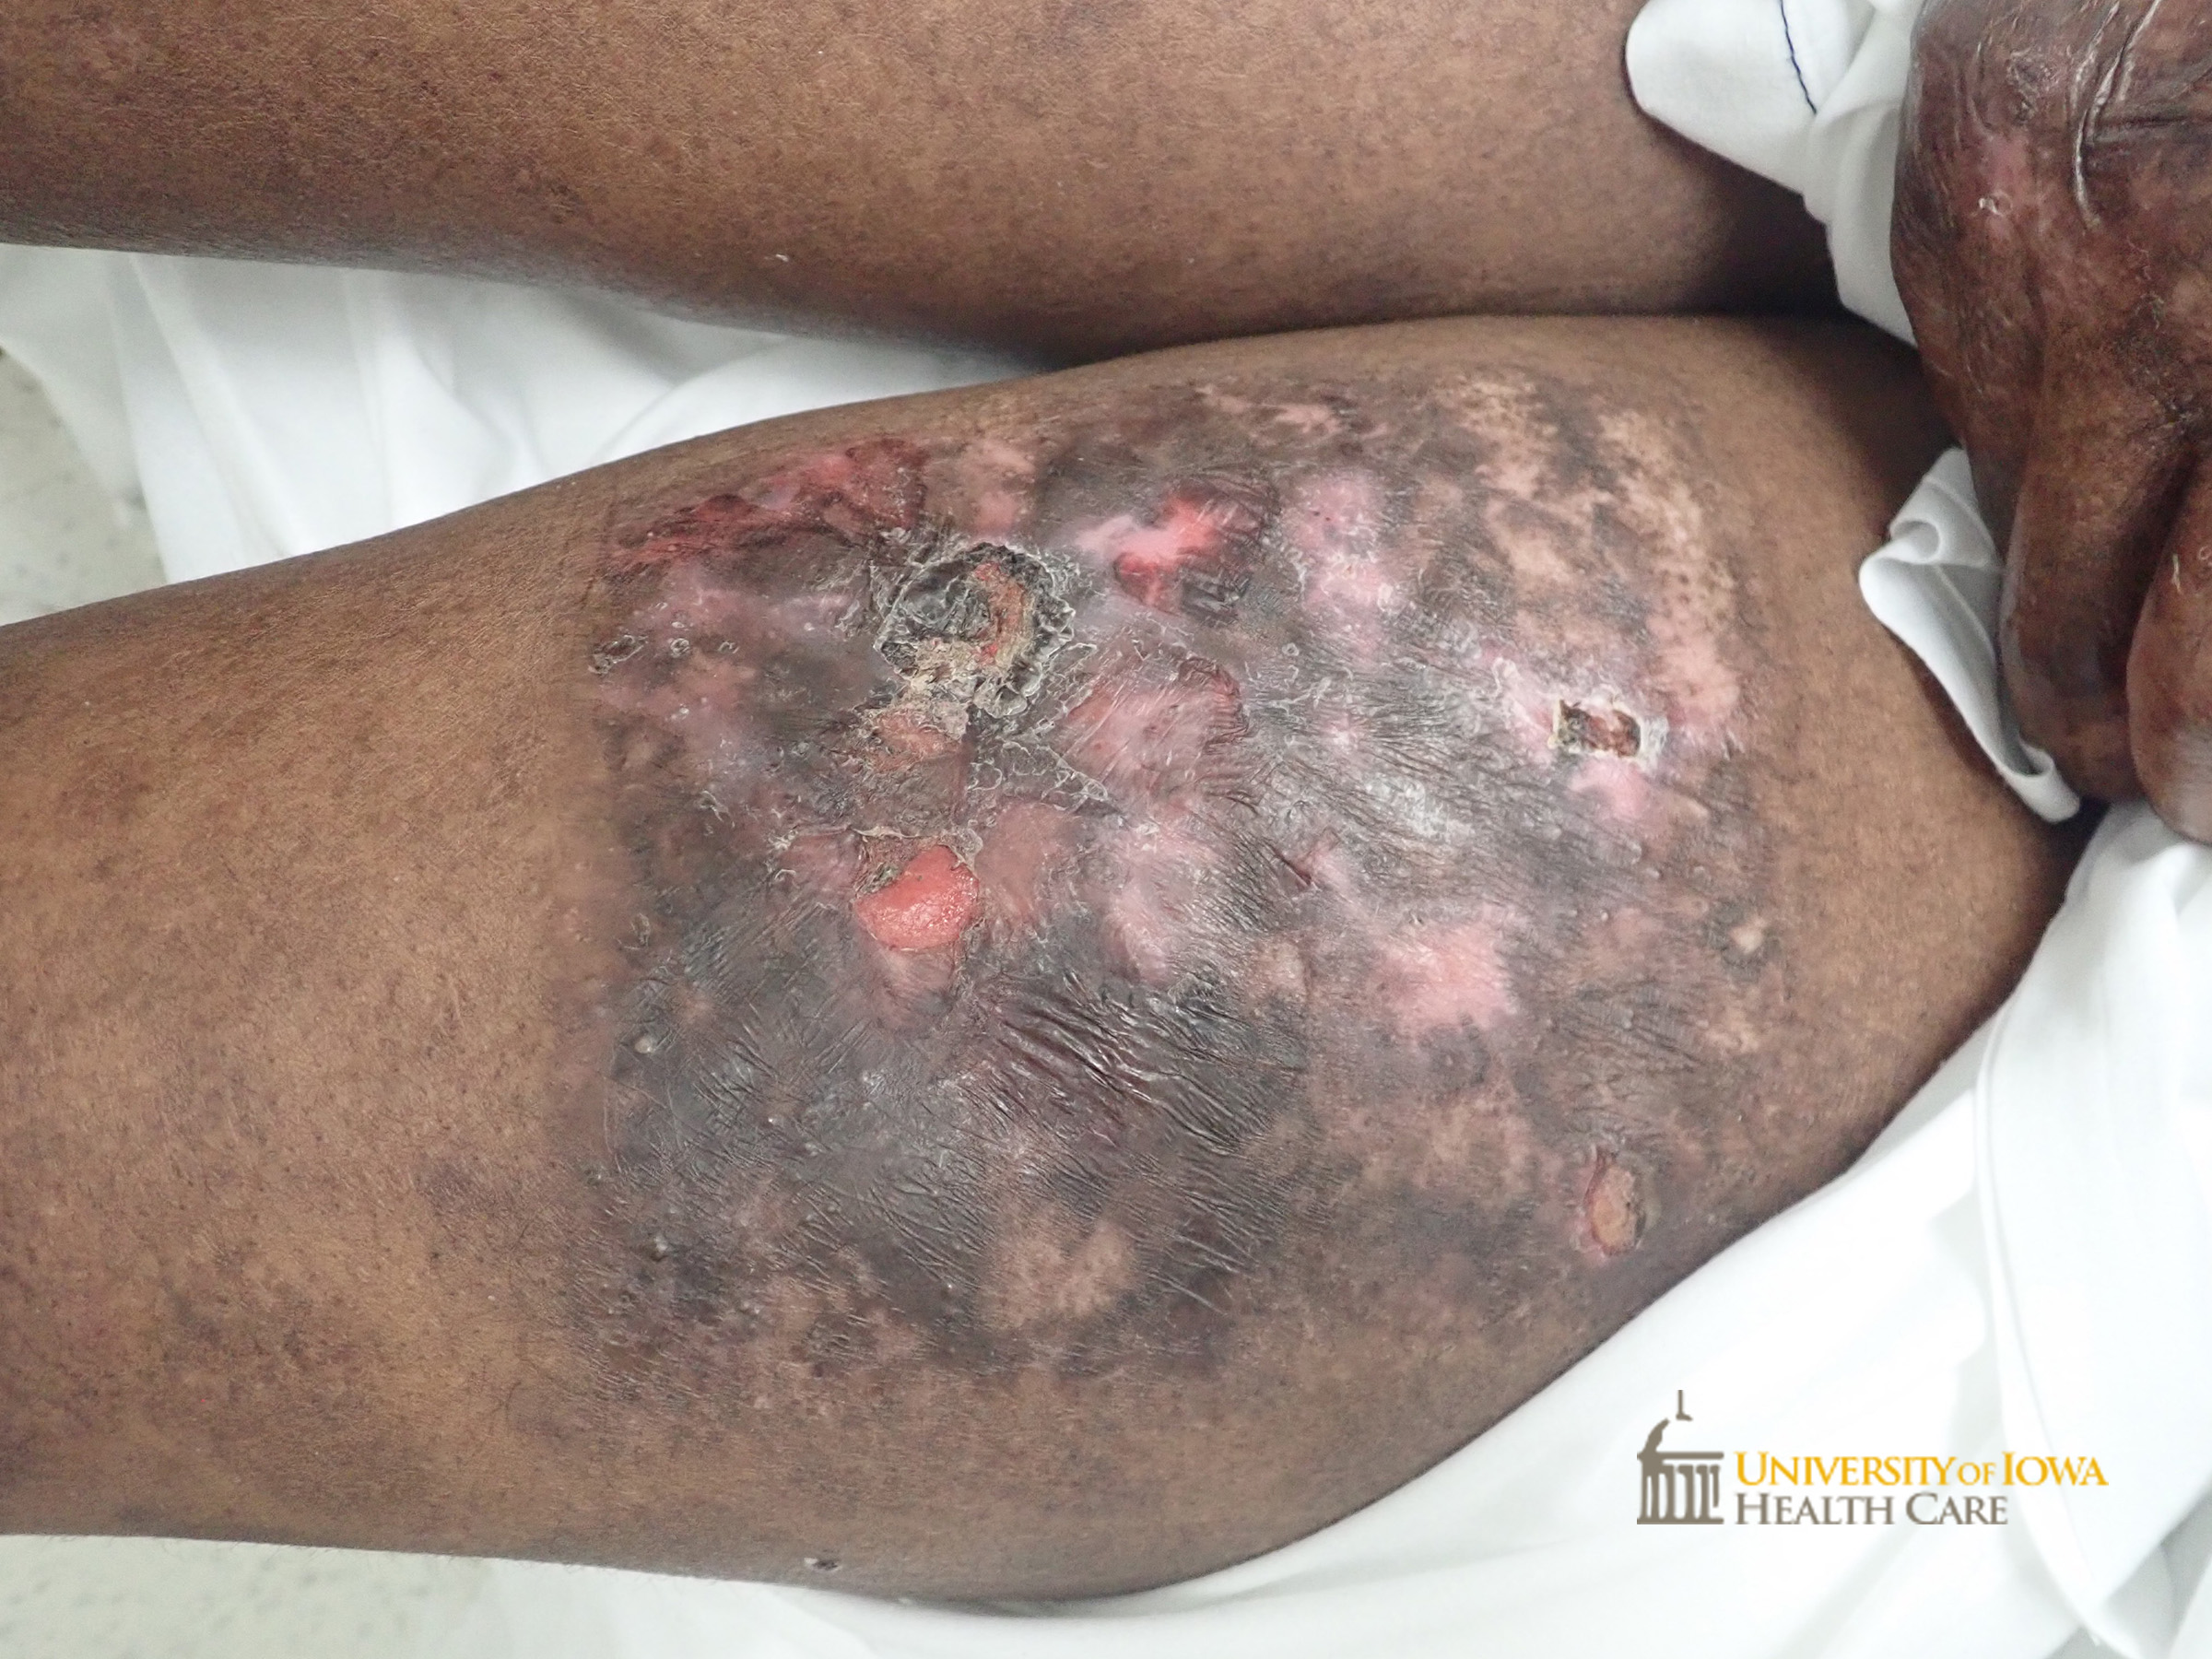 Hyperpigmented plaque with focal areas of erosion and pink scarring on the upper thigh. (click images for higher resolution).